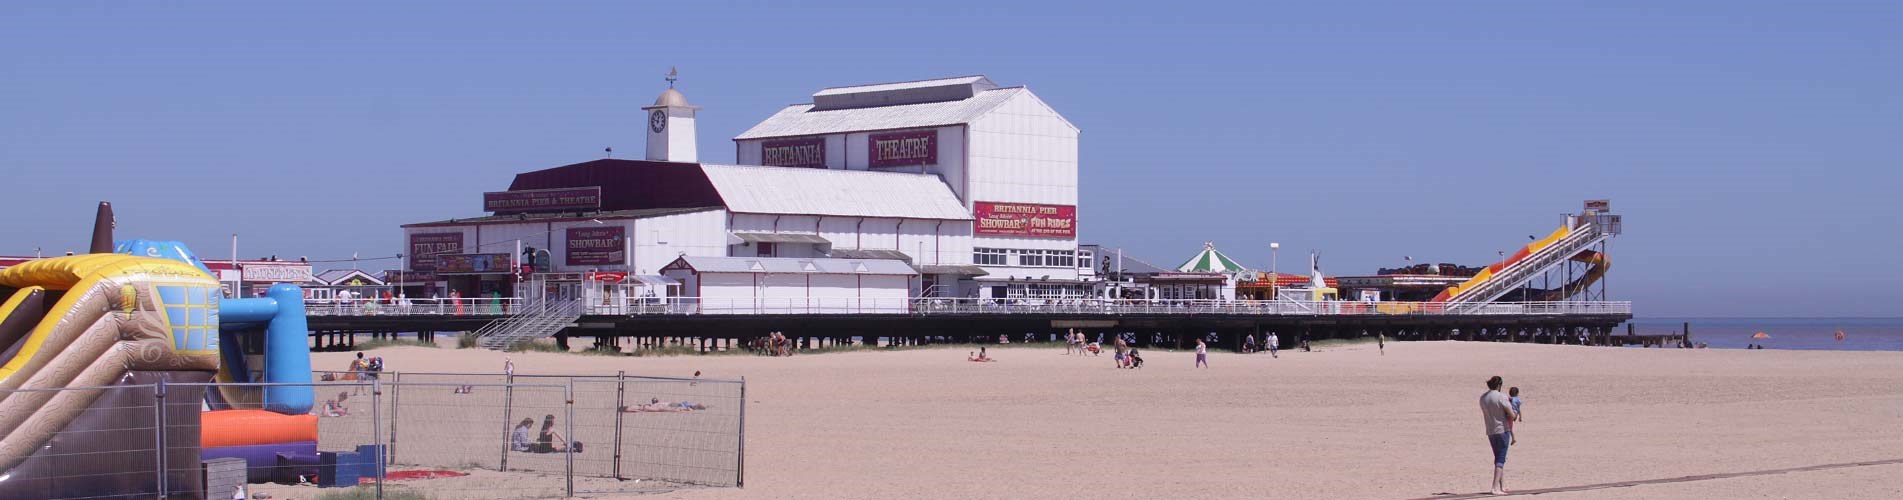 Coach holidays to great yarmouth